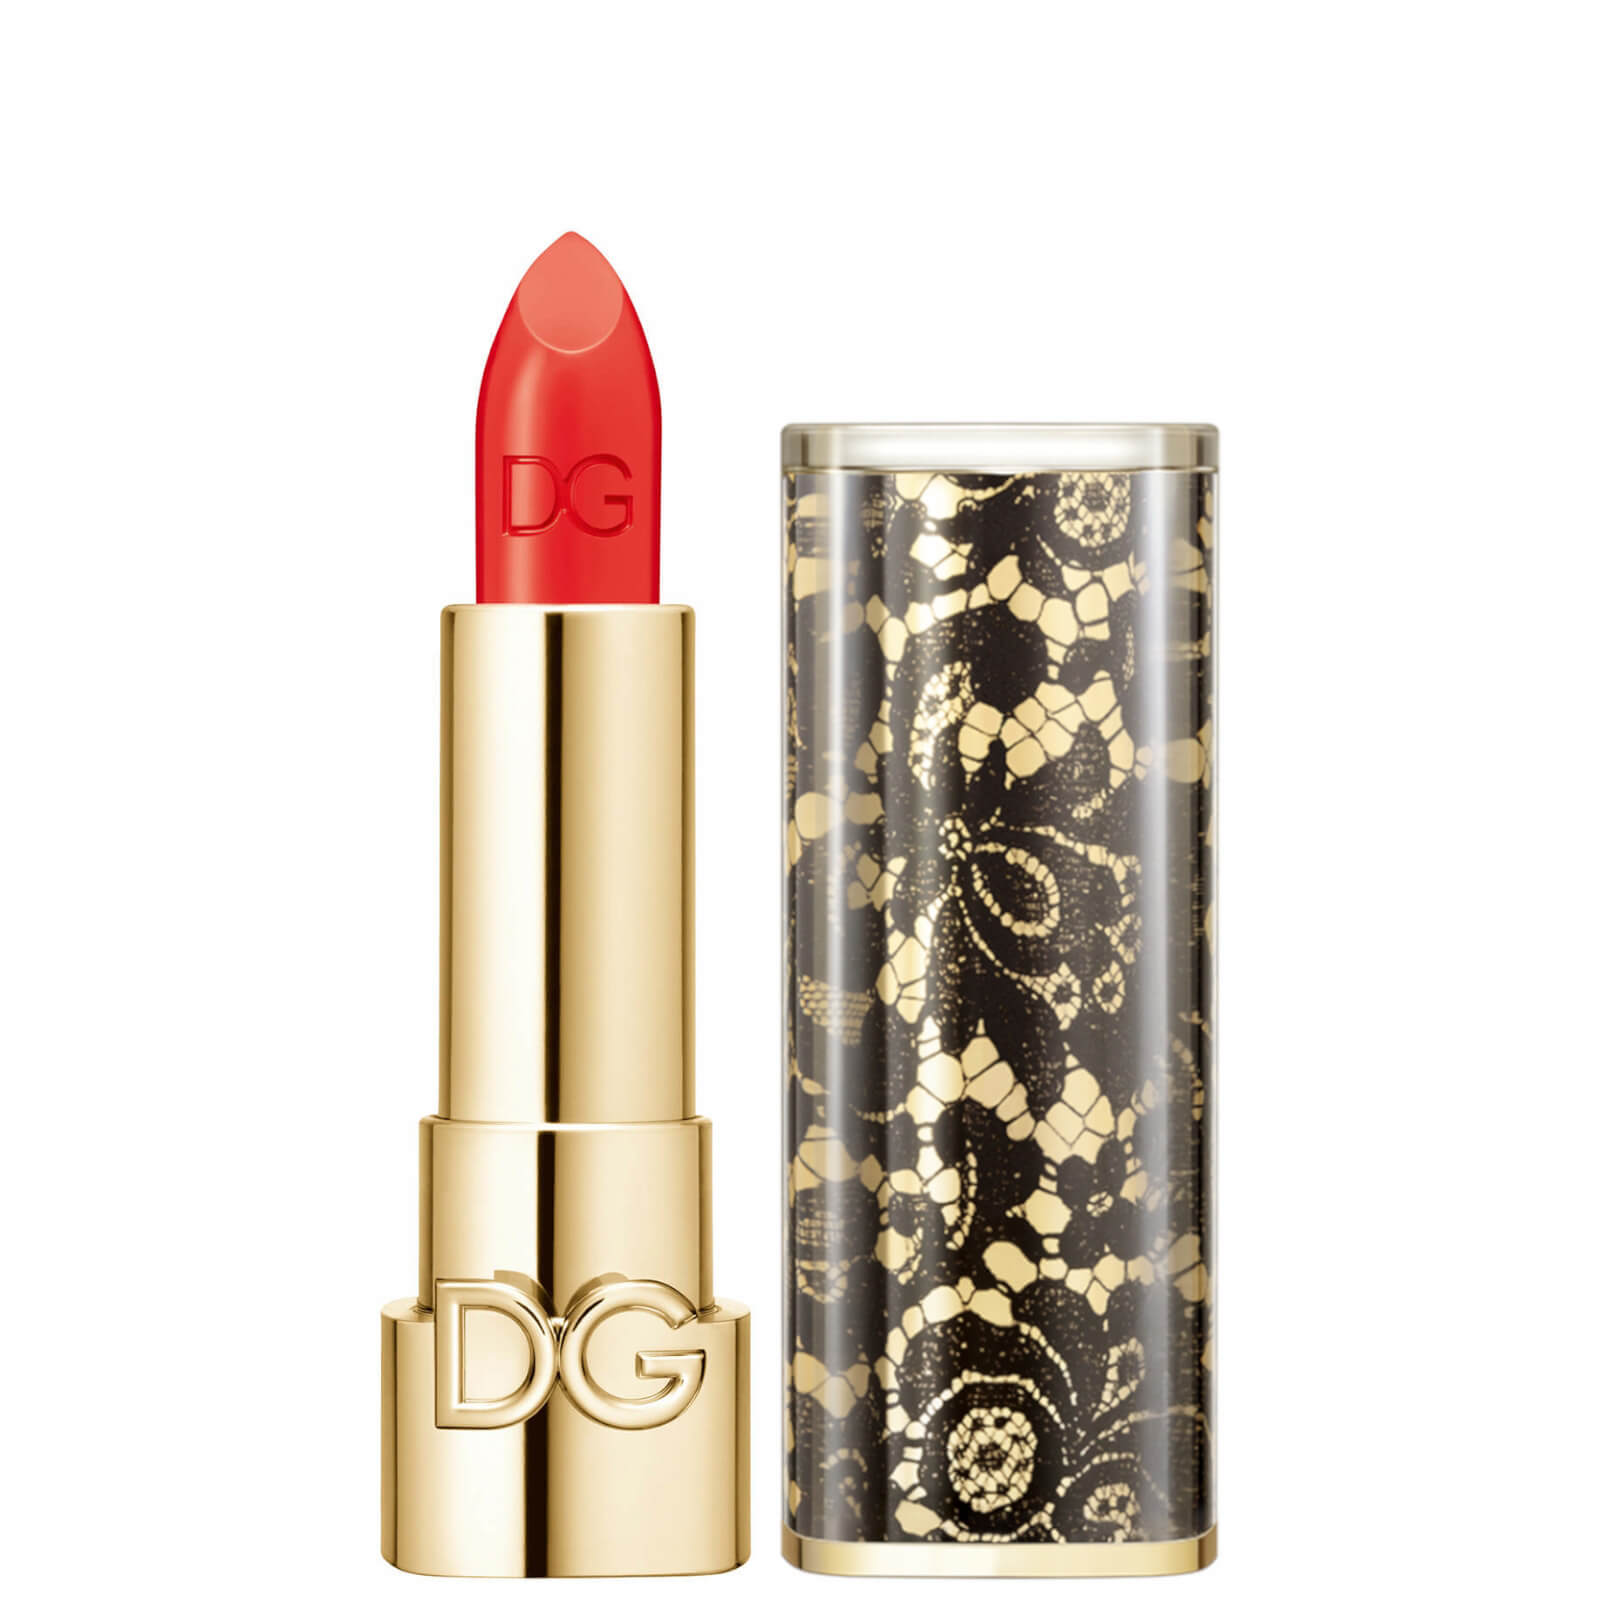 Dolce&Gabbana The Only One Lipstick + Cap (Lace) (Various Shades) - 510 Orange Vibes